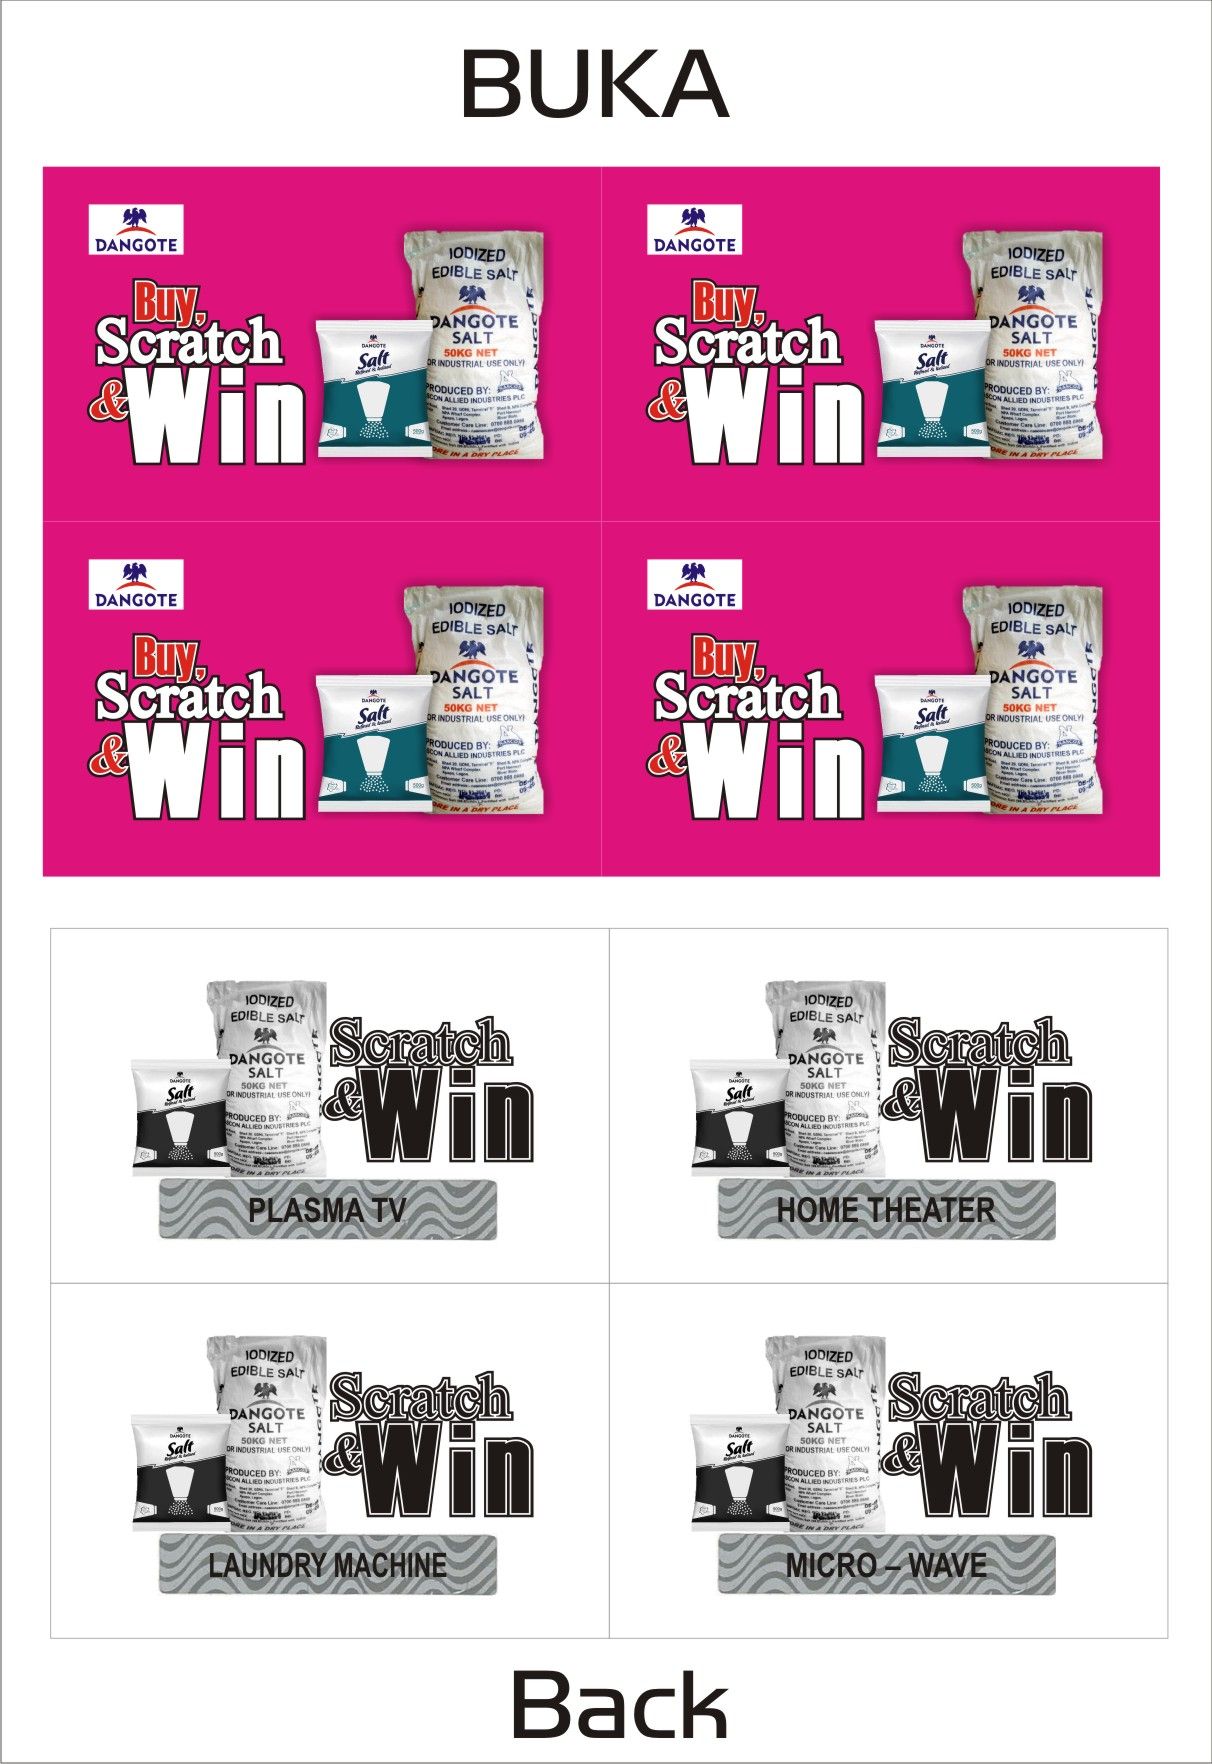 CONTACT BUKOLA ON 09099355873 TO PRINT SCRATCH AND WIN PROMO CARDS